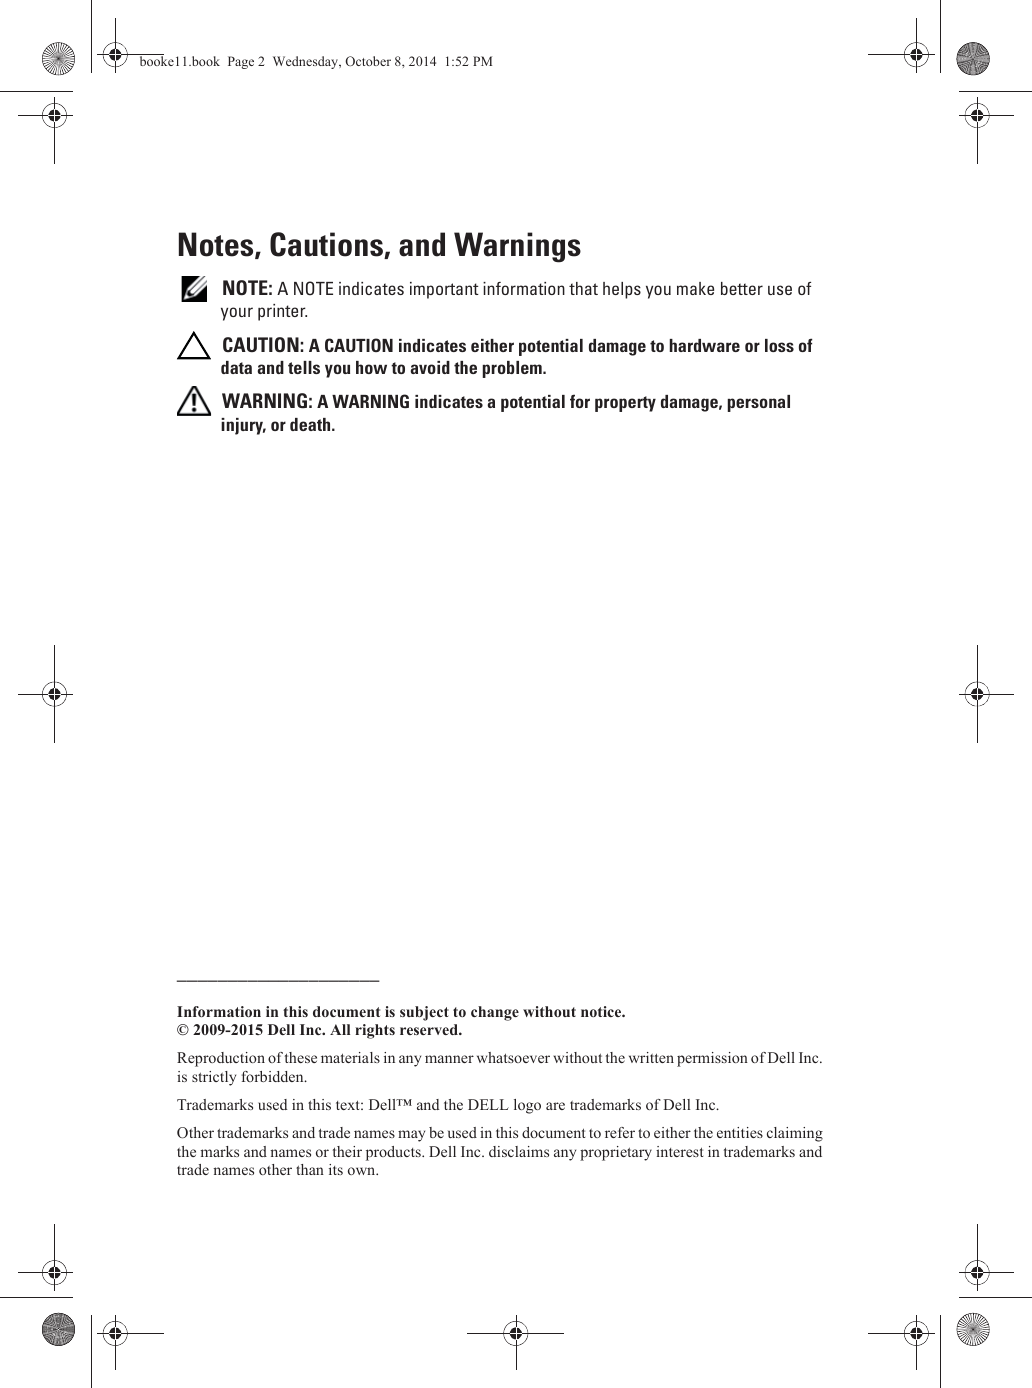 Notes, Cautions, and Warnings NOTE: A NOTE indicates important information that helps you make better use of your printer. CAUTION: A CAUTION indicates either potential damage to hardware or loss of data and tells you how to avoid the problem. WARNING: A WARNING indicates a potential for property damage, personal injury, or death.____________________Information in this document is subject to change without notice.© 2009-2015 Dell Inc. All rights reserved.Reproduction of these materials in any manner whatsoever without the written permission of Dell Inc. is strictly forbidden.Trademarks used in this text: Dell™ and the DELL logo are trademarks of Dell Inc.Other trademarks and trade names may be used in this document to refer to either the entities claiming the marks and names or their products. Dell Inc. disclaims any proprietary interest in trademarks and trade names other than its own.booke11.book  Page 2  Wednesday, October 8, 2014  1:52 PM